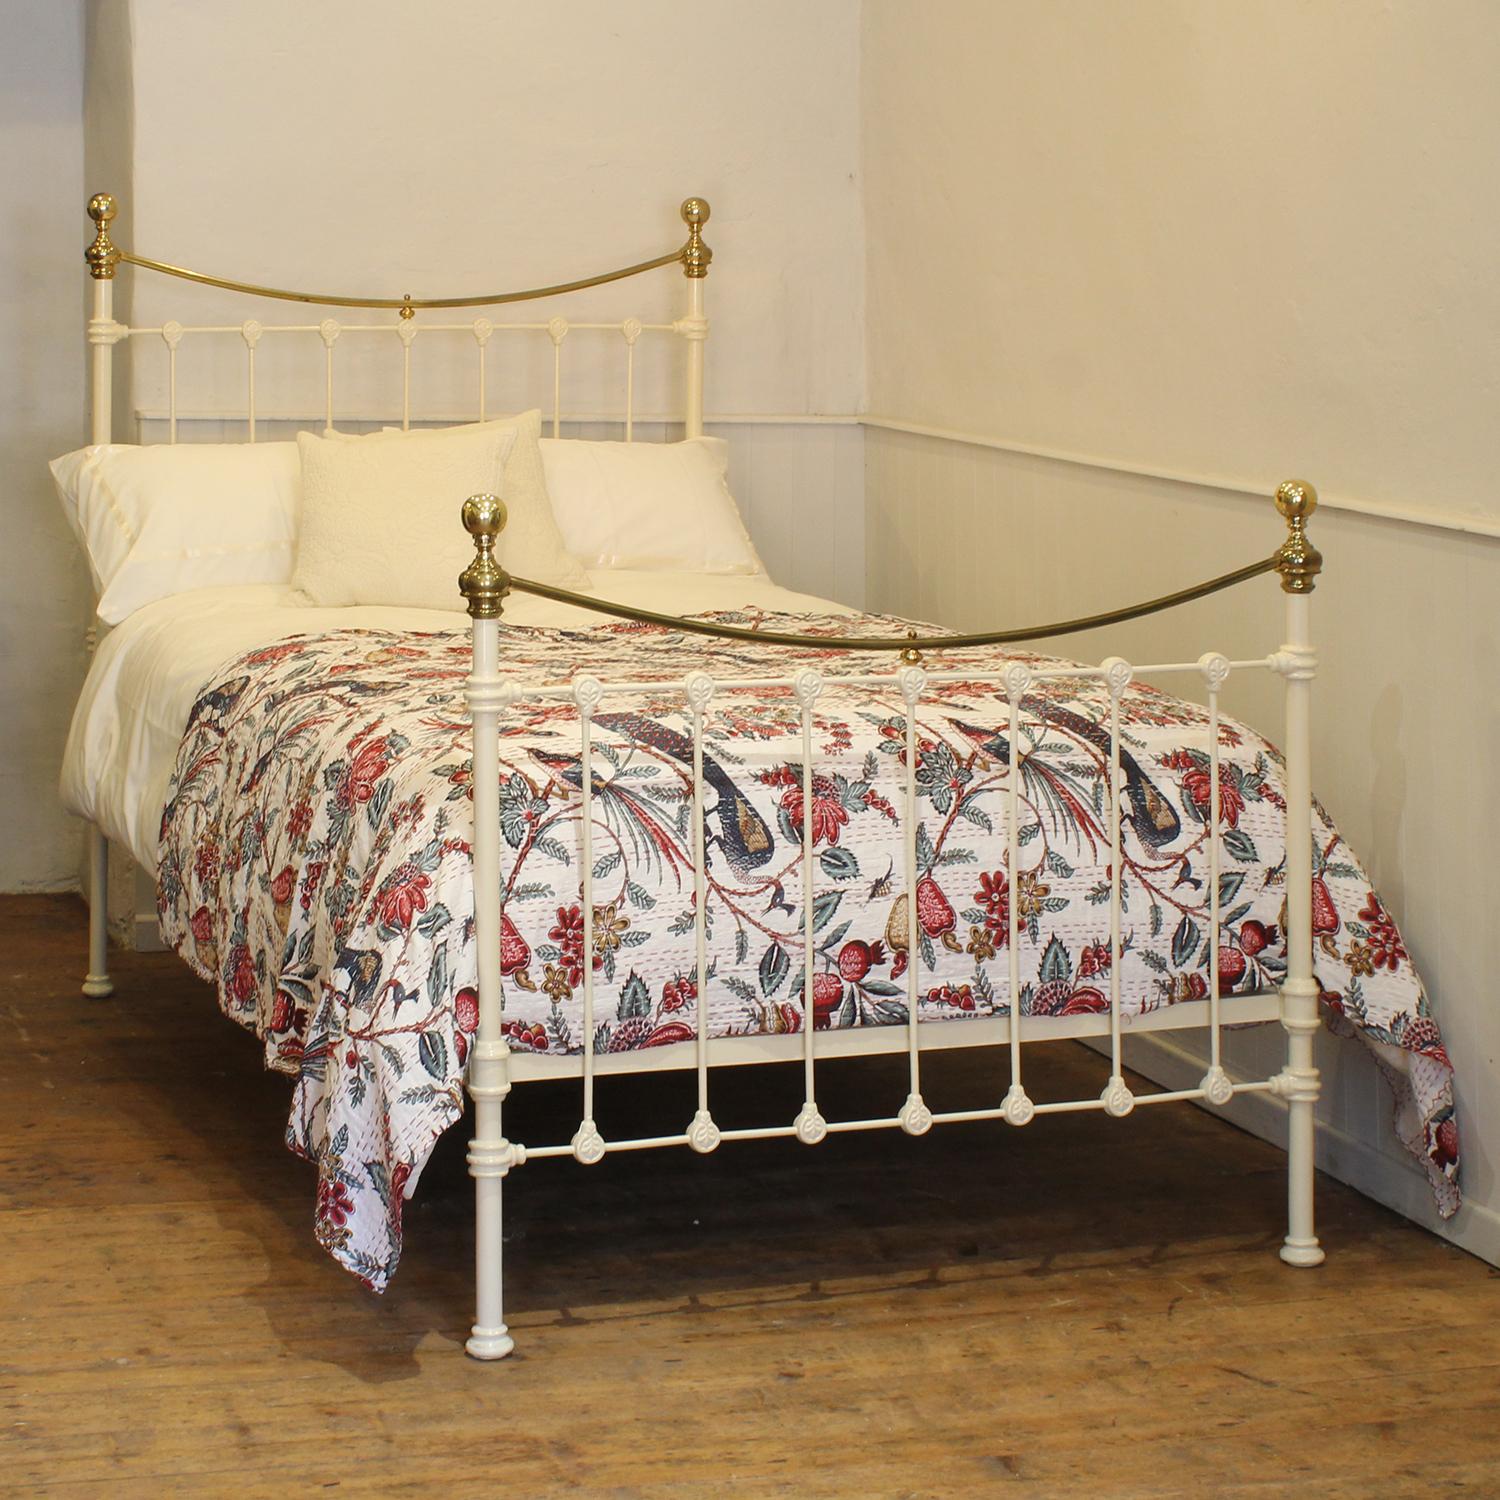 A small double Victorian cast iron and brass bedstead finished in cream with curved brass top rails and attractive castings.

This bed accepts a small double size 4ft wide (48 inch or 120cm) base and mattress. 

The price includes a firm standard